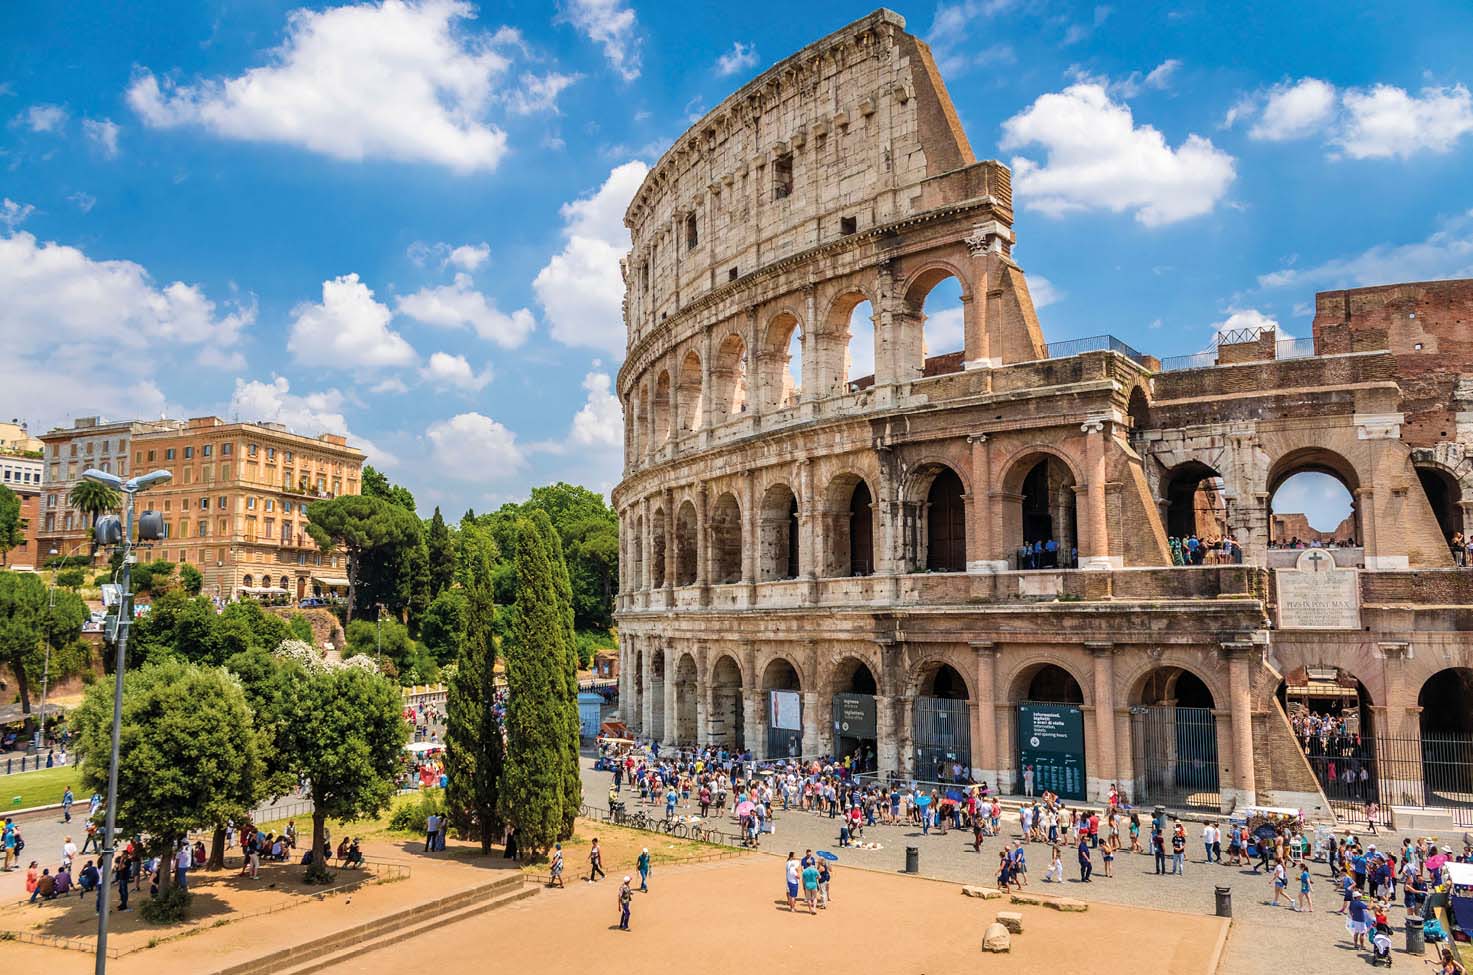 Panorama view of the Colosseum in Rome, with a blue sky and clouds, and tourists walking by